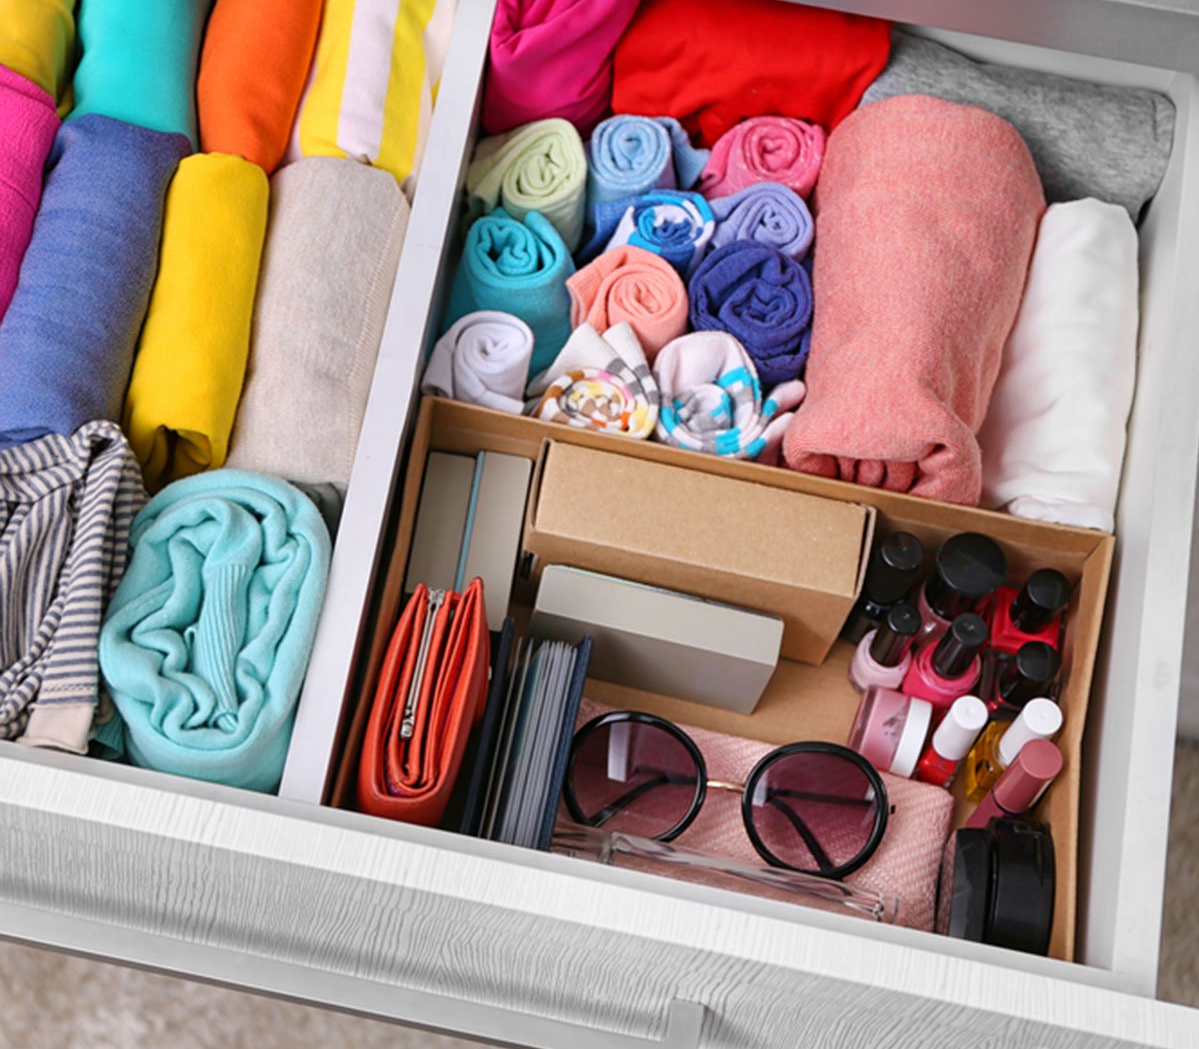 How To “KonMari” Your Way To A Personal Storage Facility Image